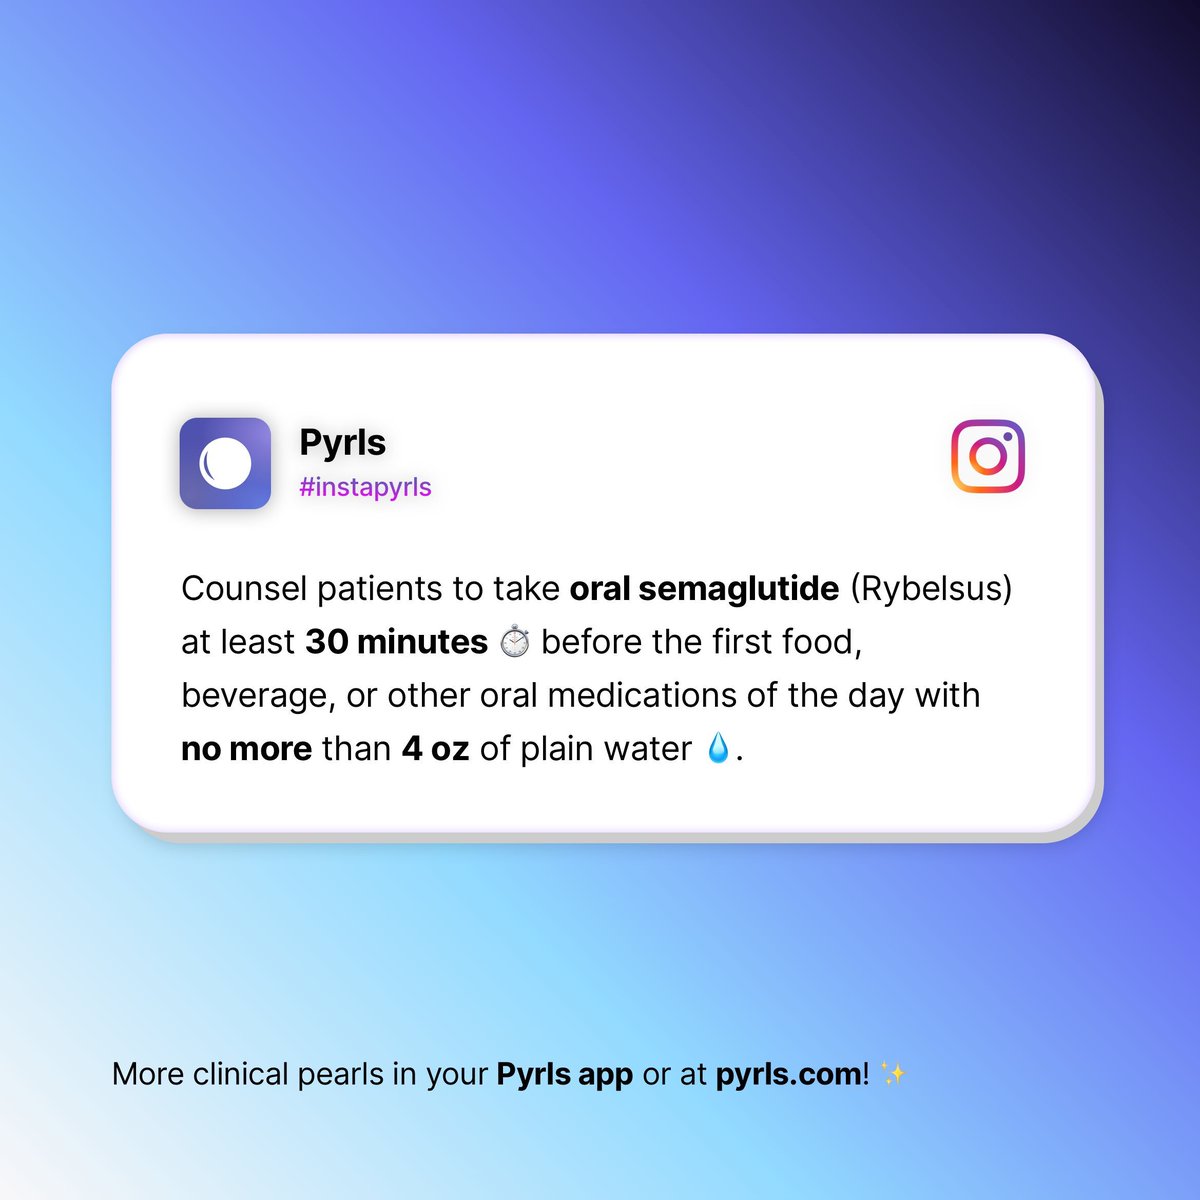 Counsel patients to take oral semaglutide (Rybelsus) at least 30 minutes ⏱️ before the first food, beverage, or other oral medications of the day with no more than 4 oz of plain water 💧.